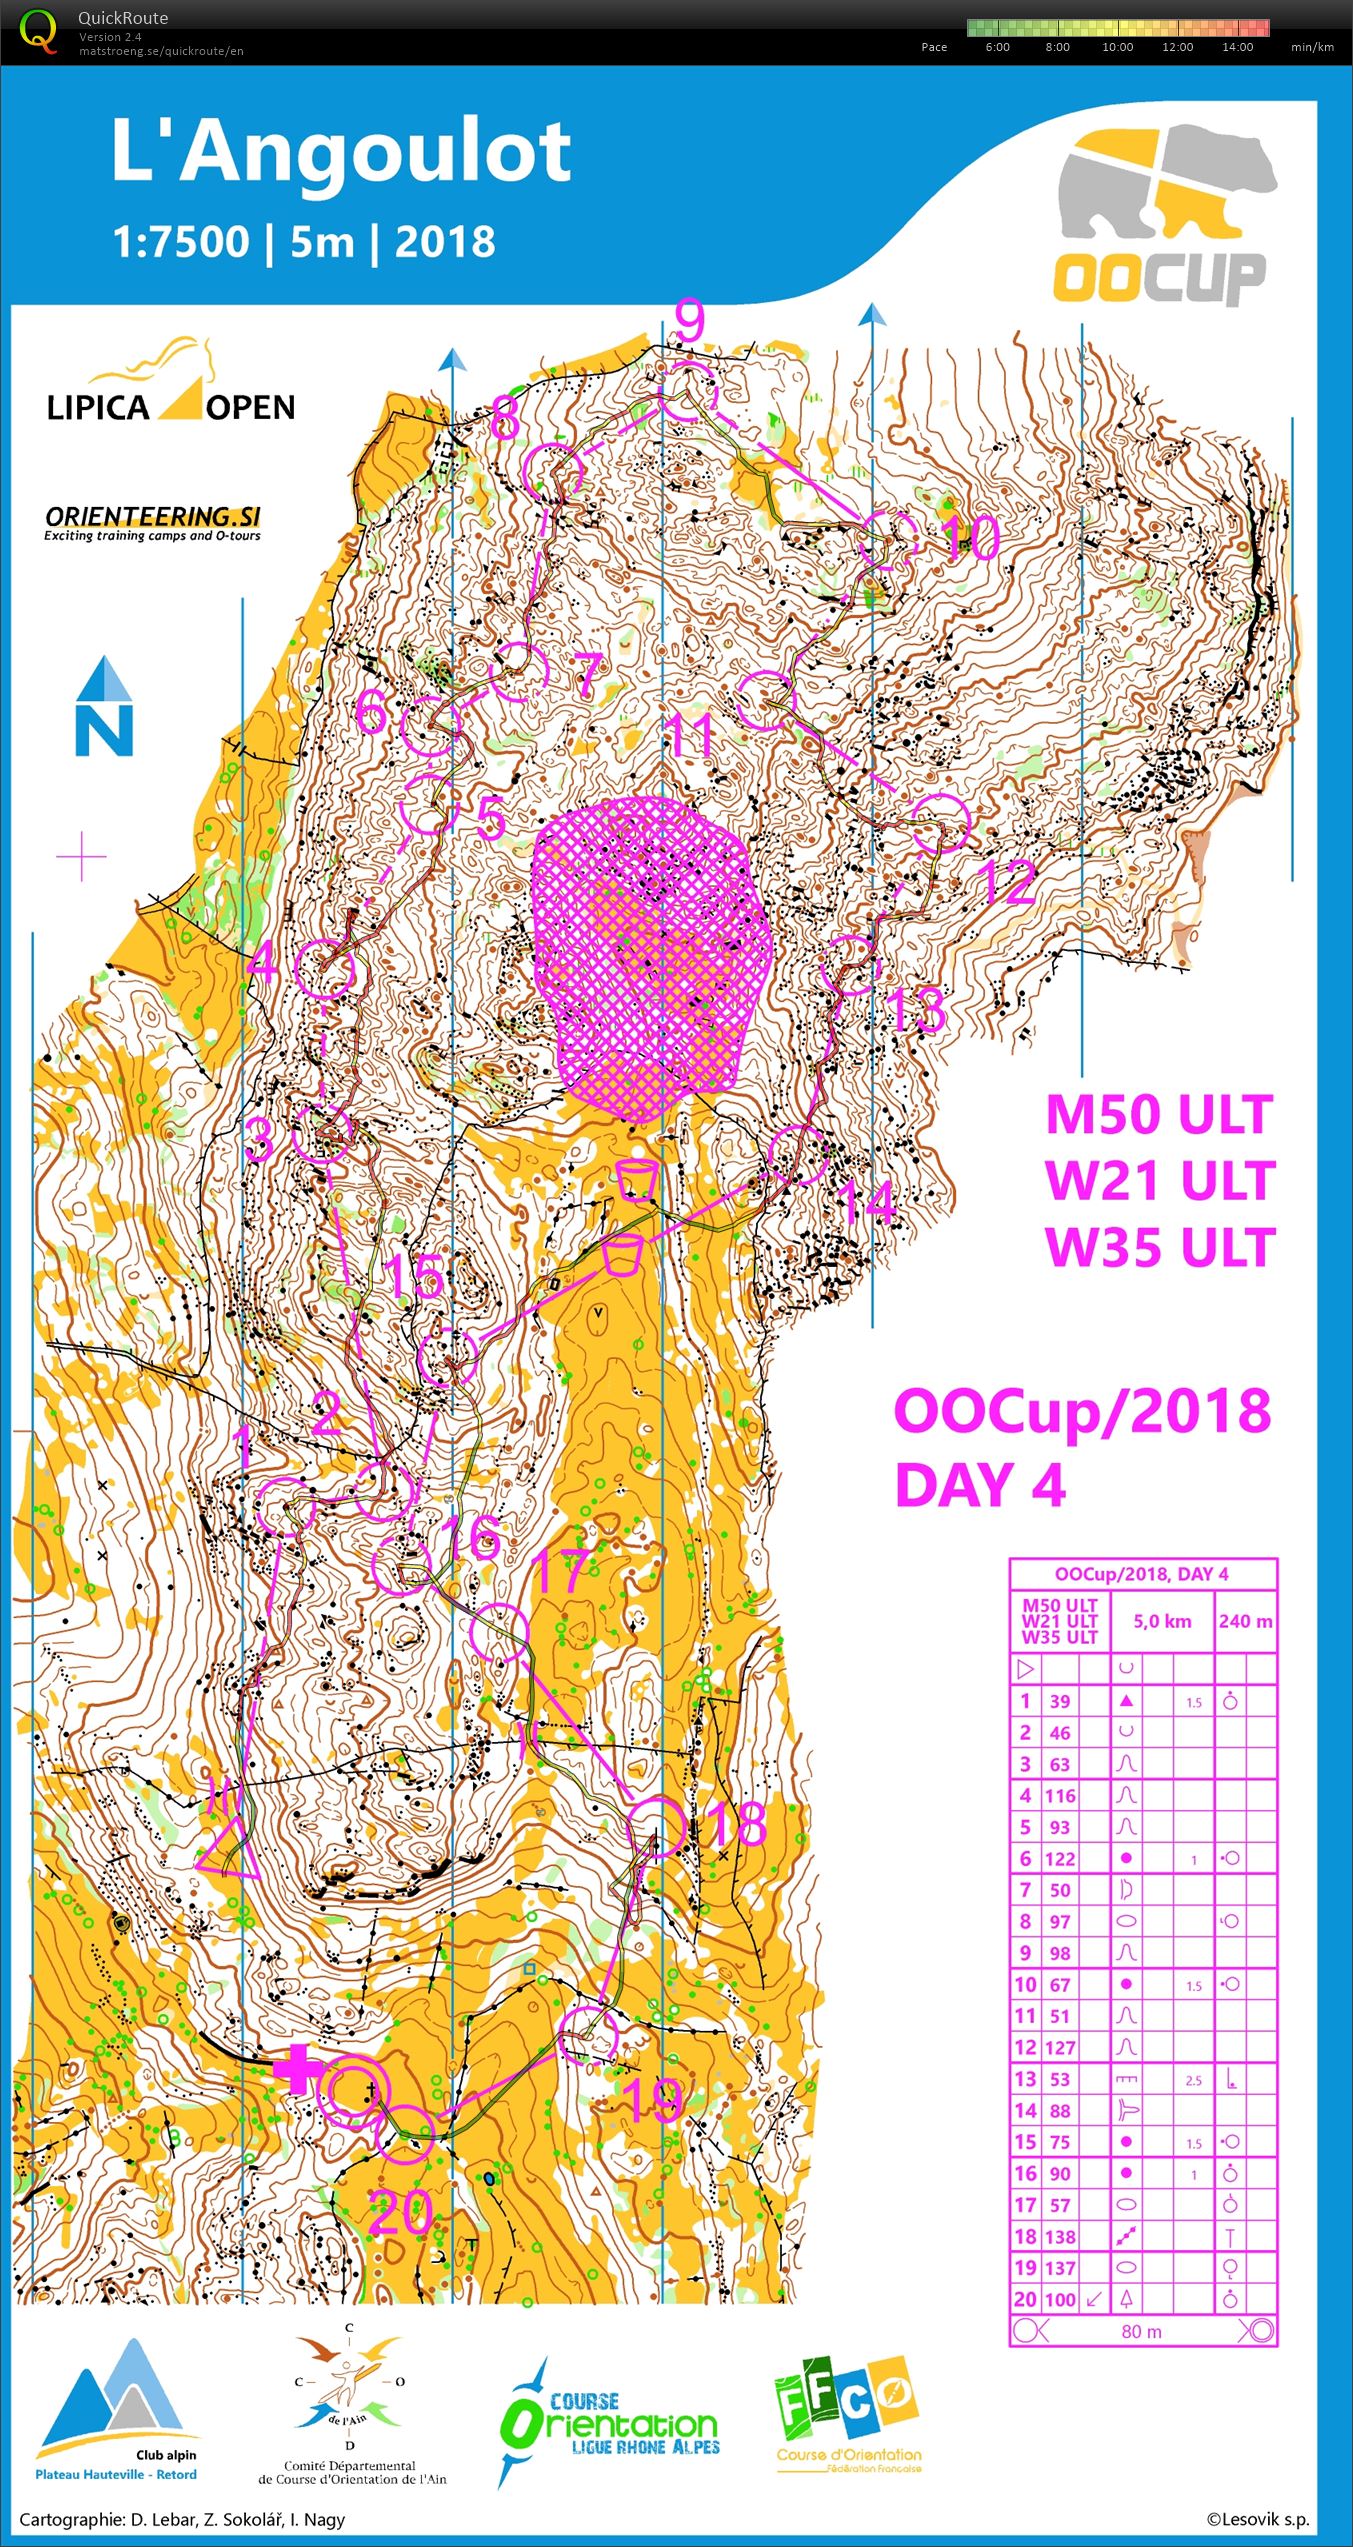 OOcup 2018 - Day 4 (28/07/2018)